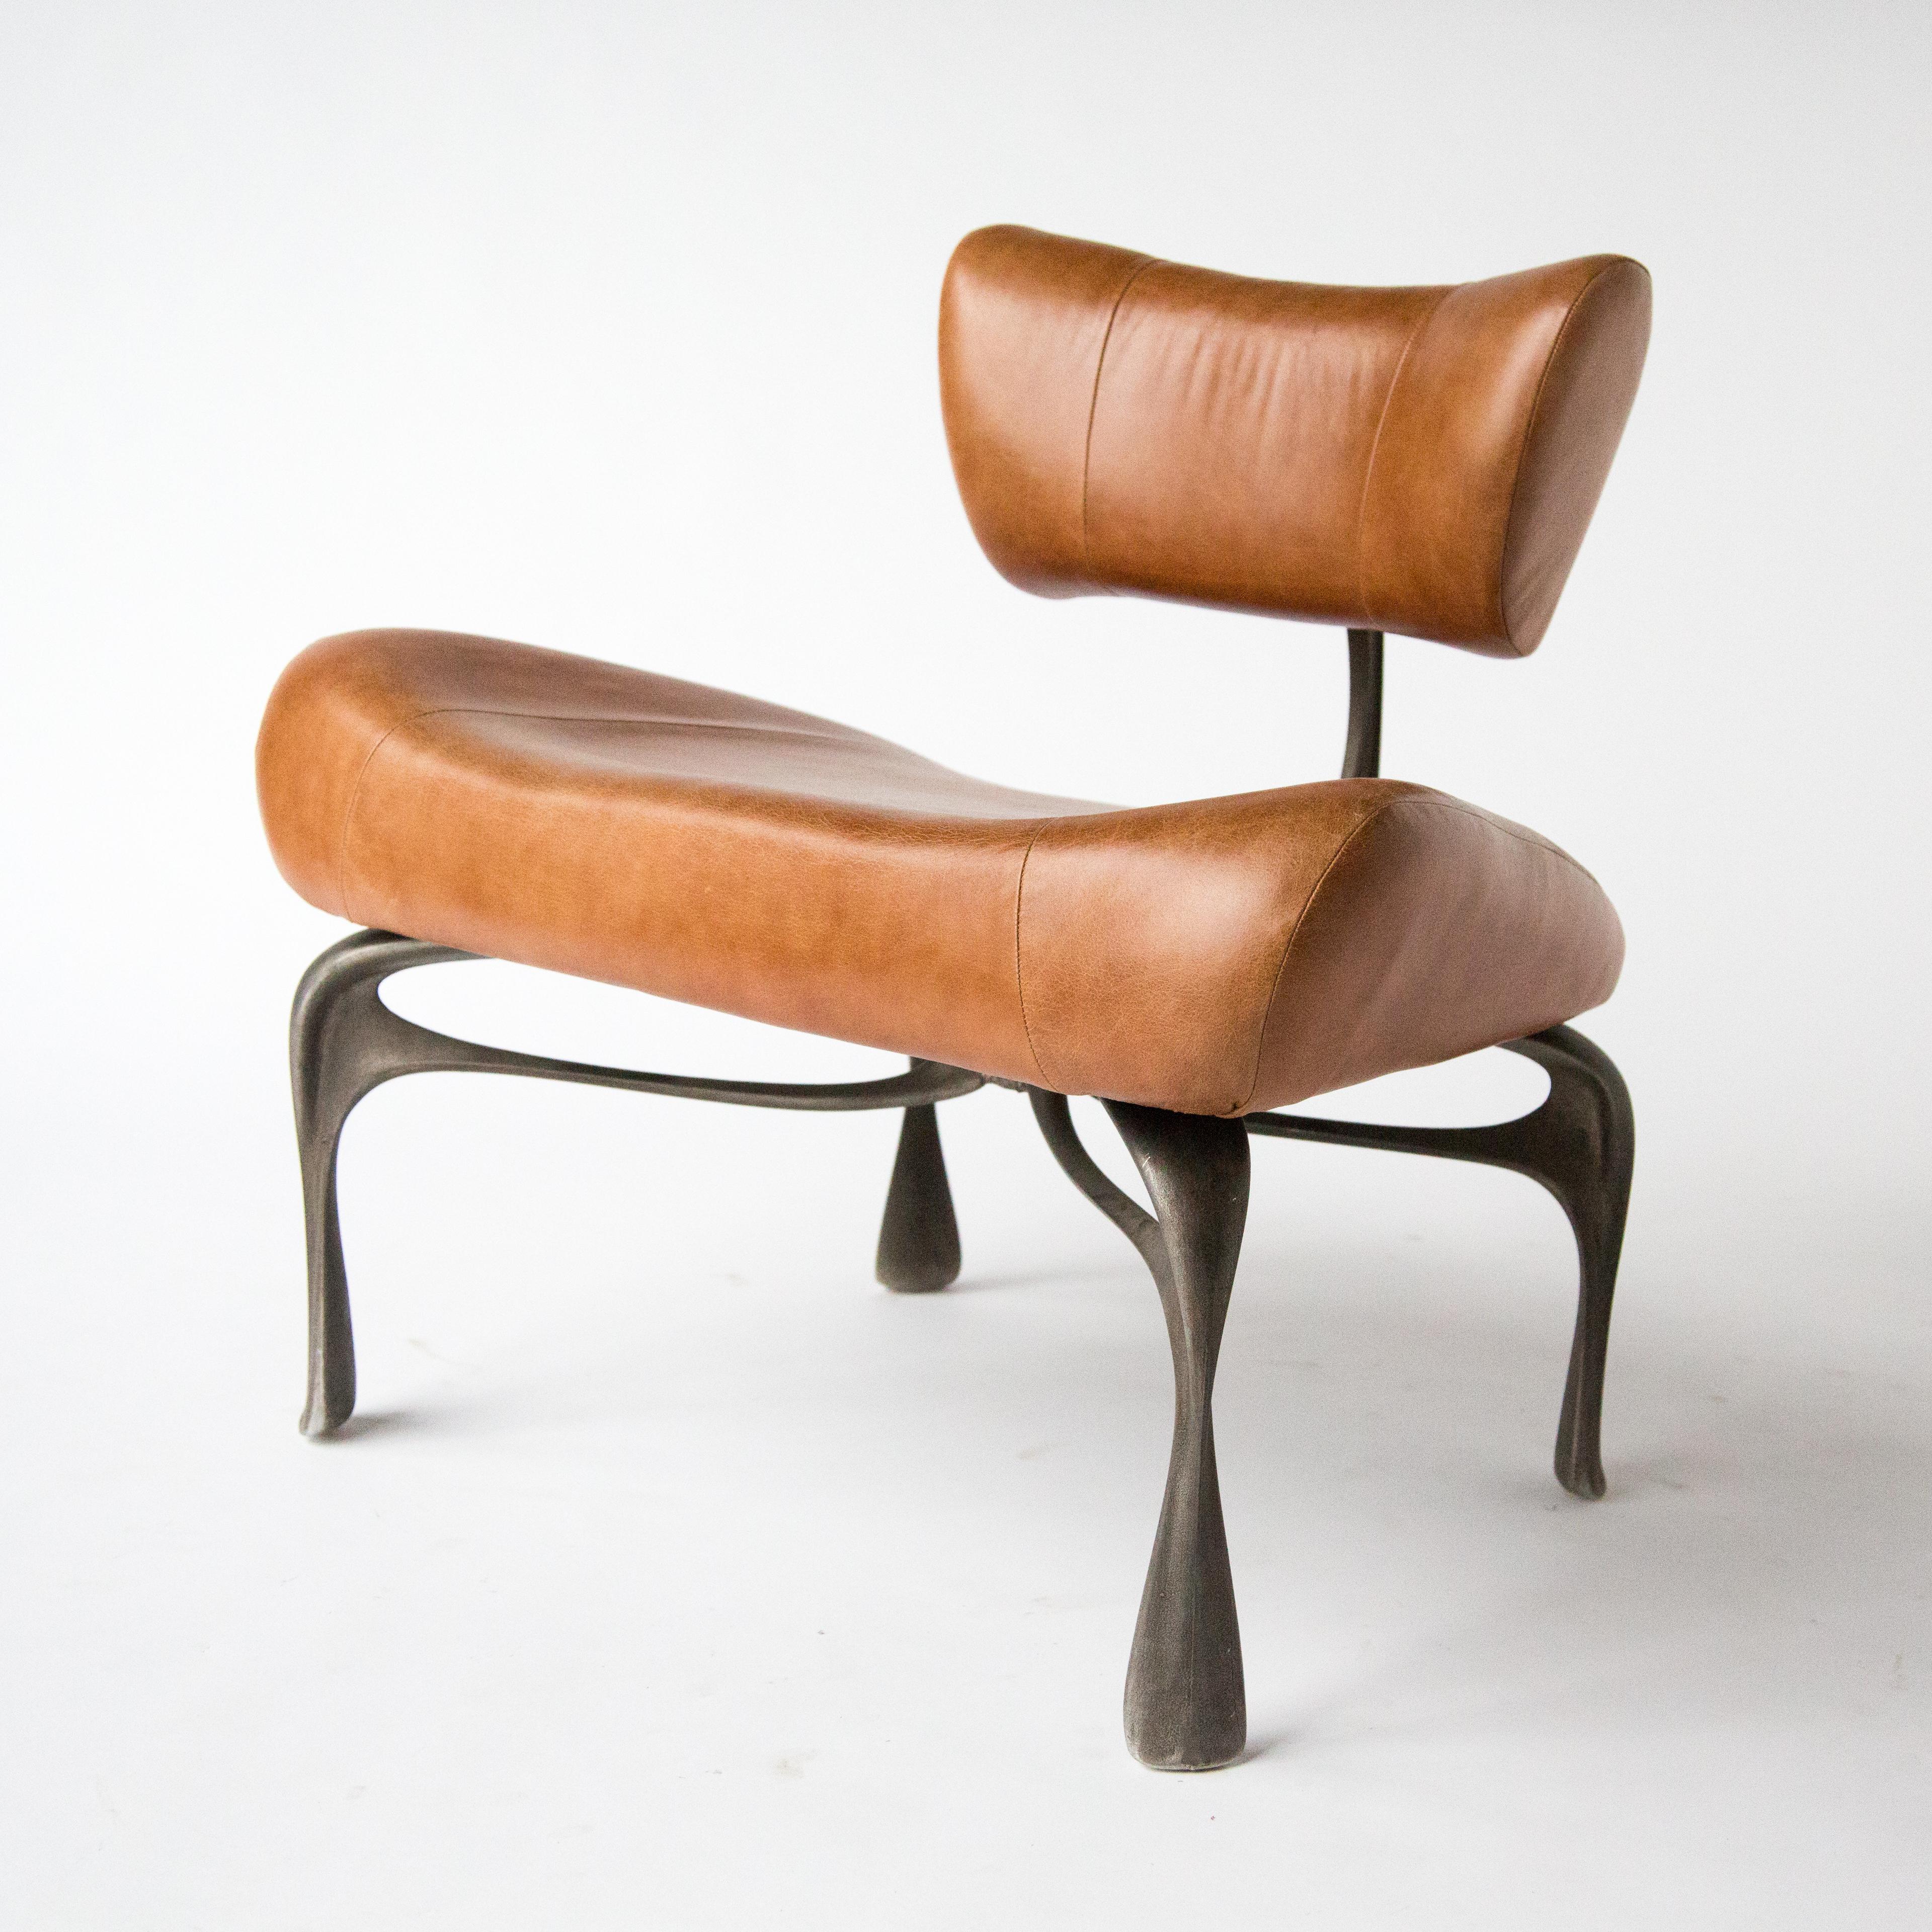 Jordan Mozer, Victory lounge chair, leather and cast, recycled magnesium-aluminum alloy with hand rubbed patina, made in Chicago, 2012/2019. A 2019 variation on the lounge chairs created for Victory at the Meadowlands in 2012-13. It is about 31”